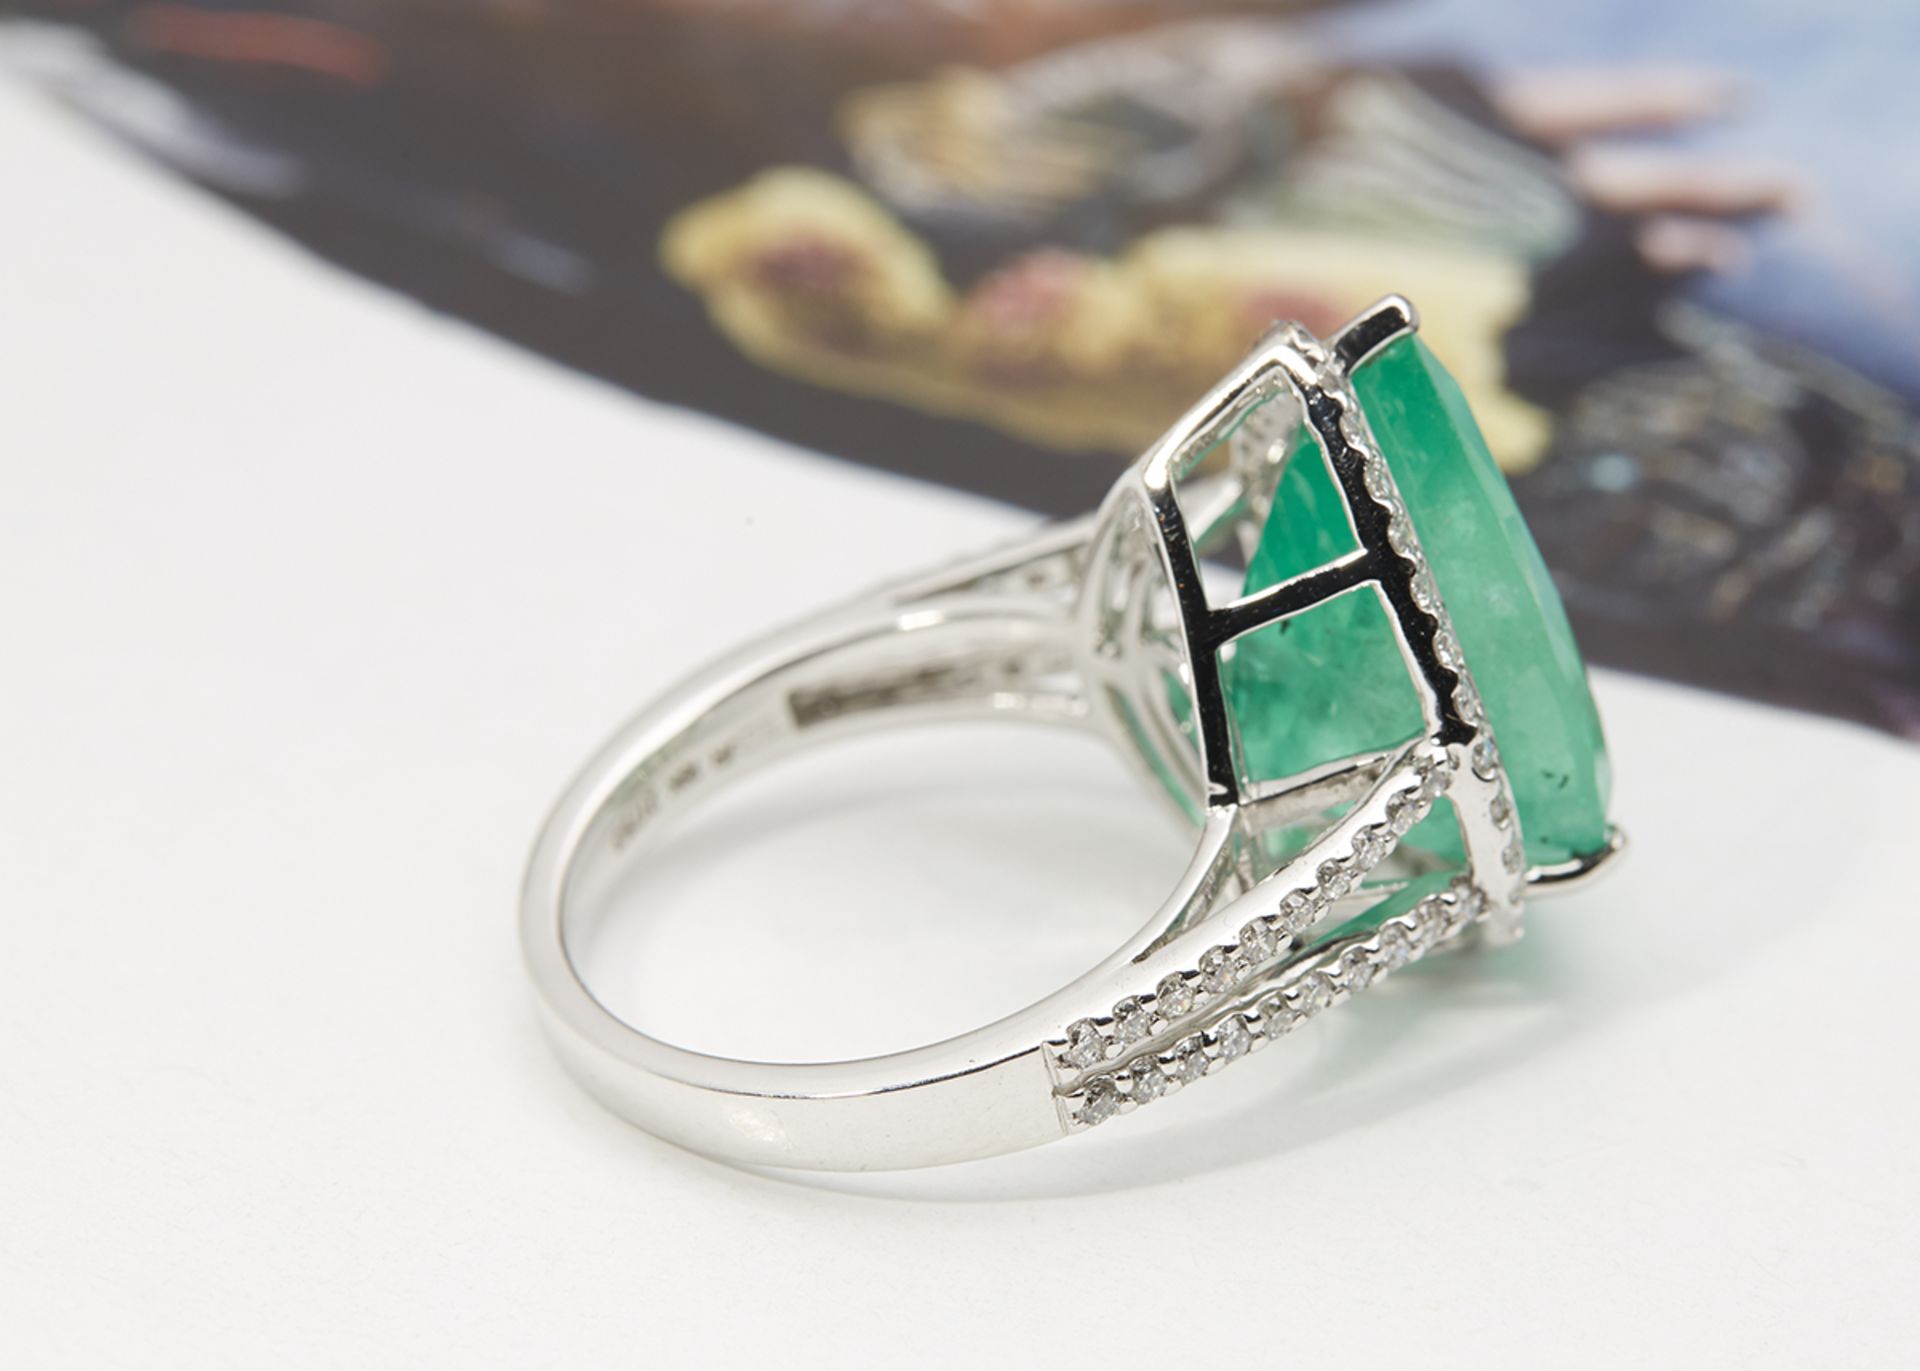 18k White Gold 8.66ct Colombian Emerald & 0.65ct Diamond Ring - Image 3 of 5